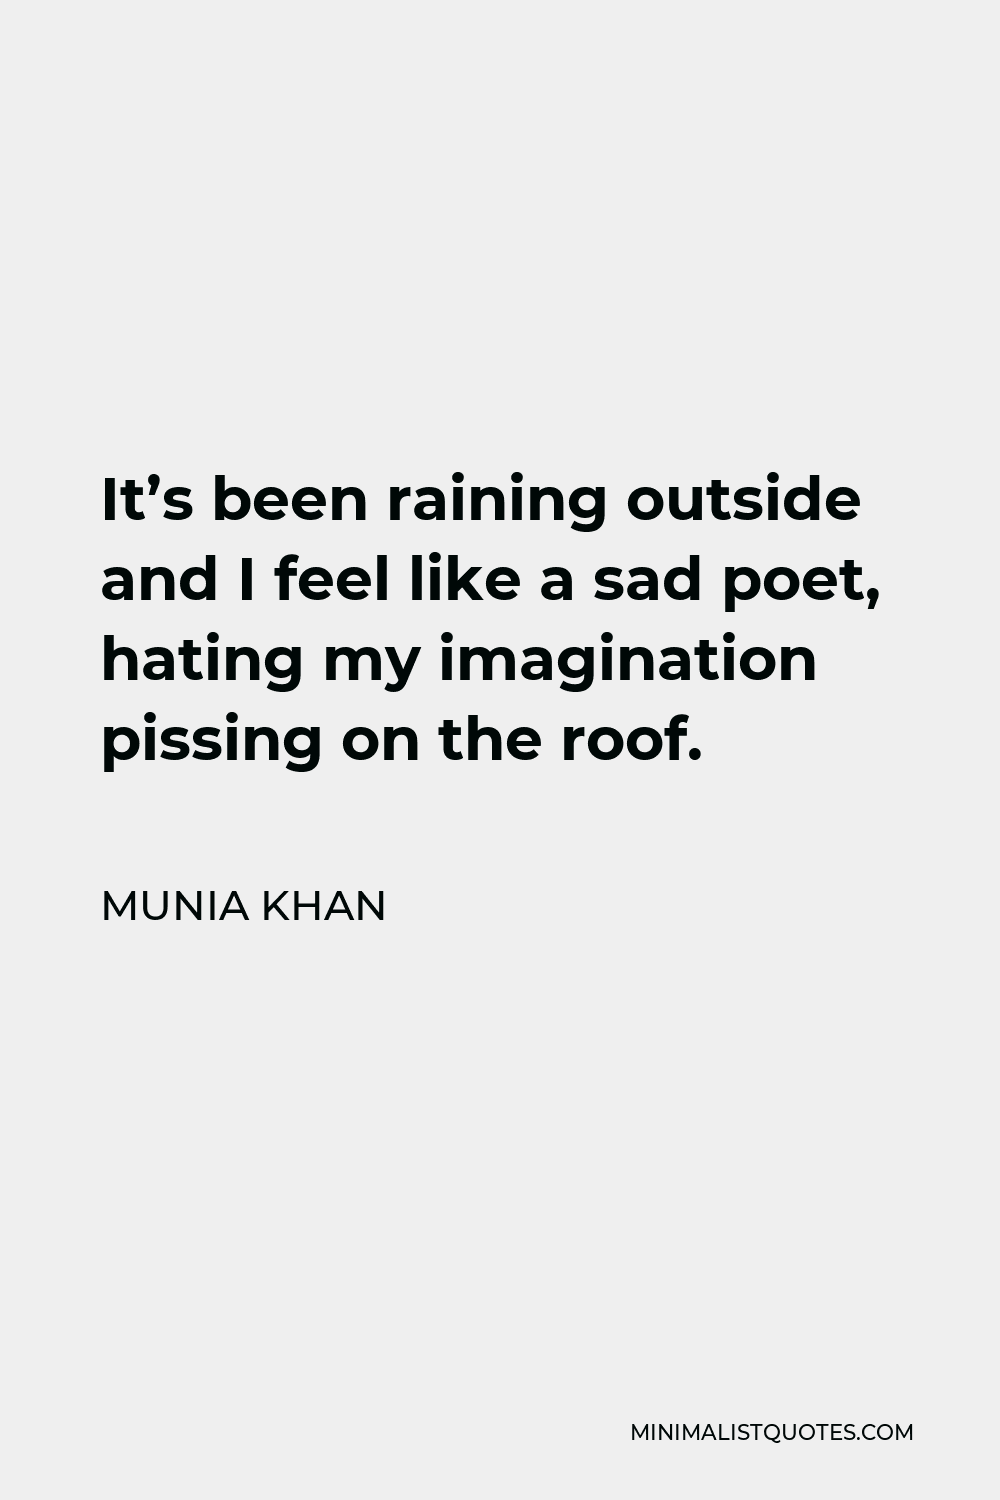 Munia Khan Quote - It’s been raining outside and I feel like a sad poet, hating my imagination pissing on the roof.